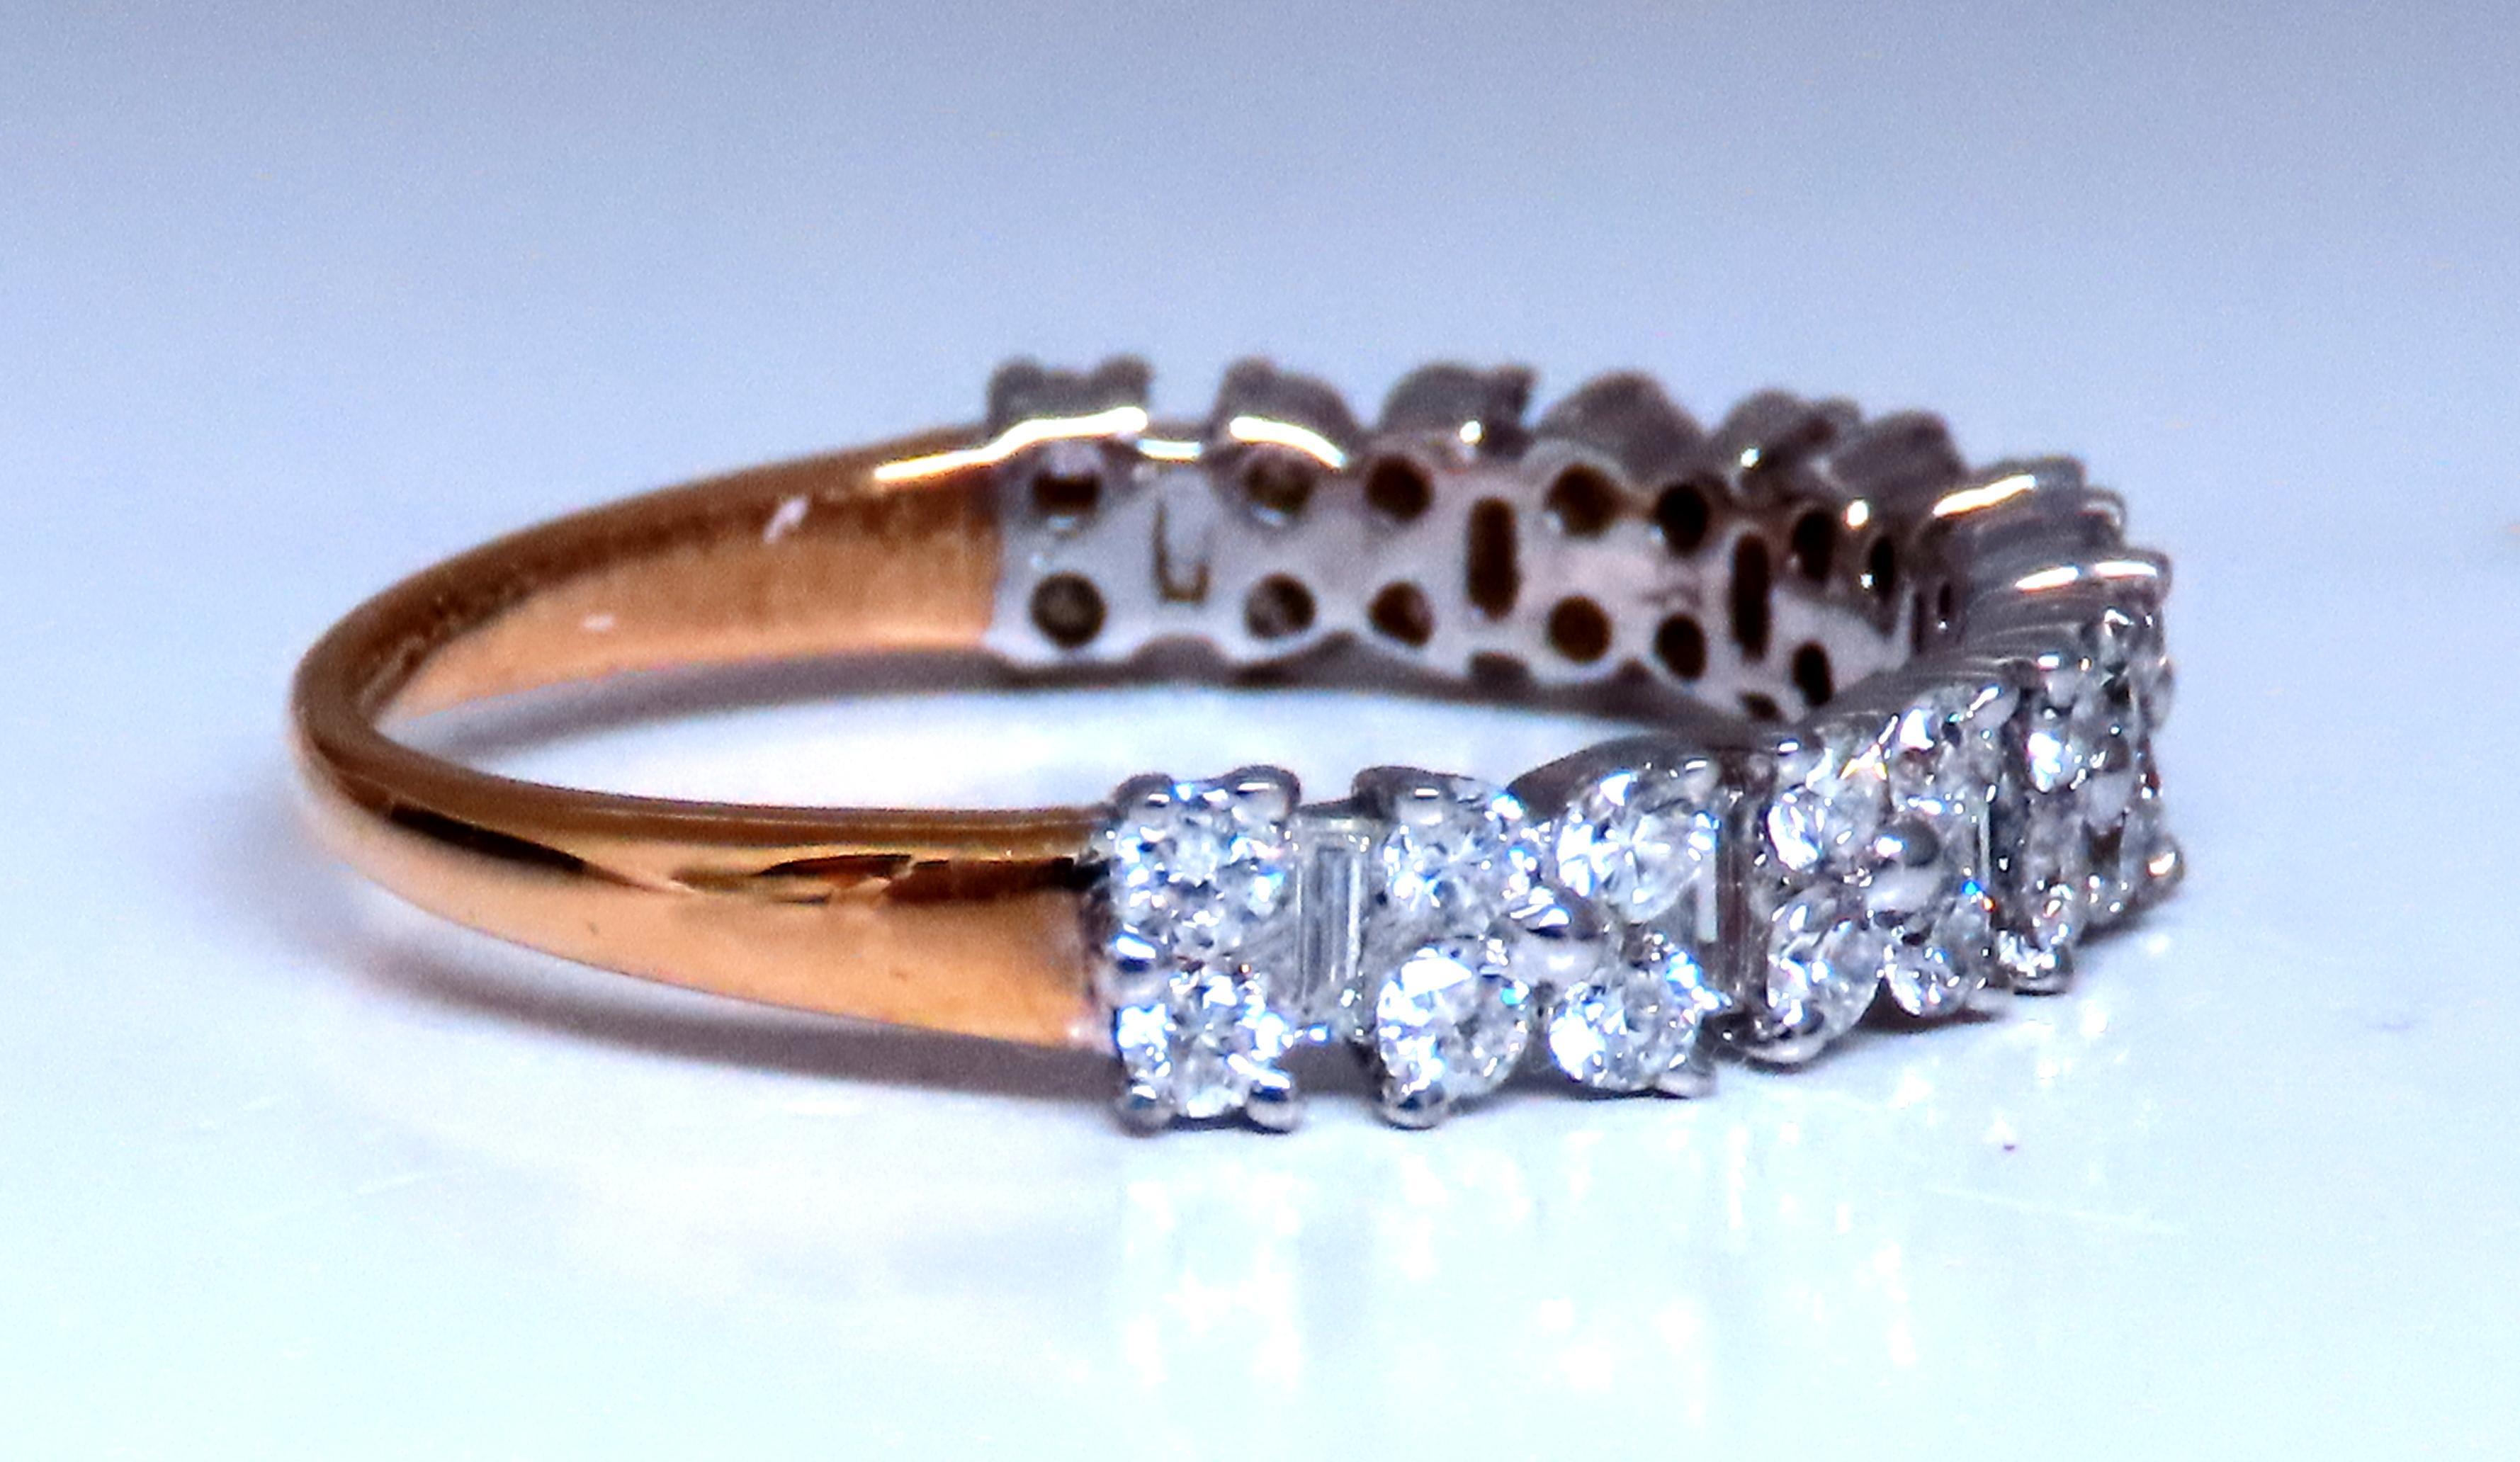 .75ct Natural Baguette & Round Diamonds Flat band.
Made to adjacent with your engagement ring
G-color Vs-2 Clarity
18kt yellow gold.
2.5 Grams
Size 7